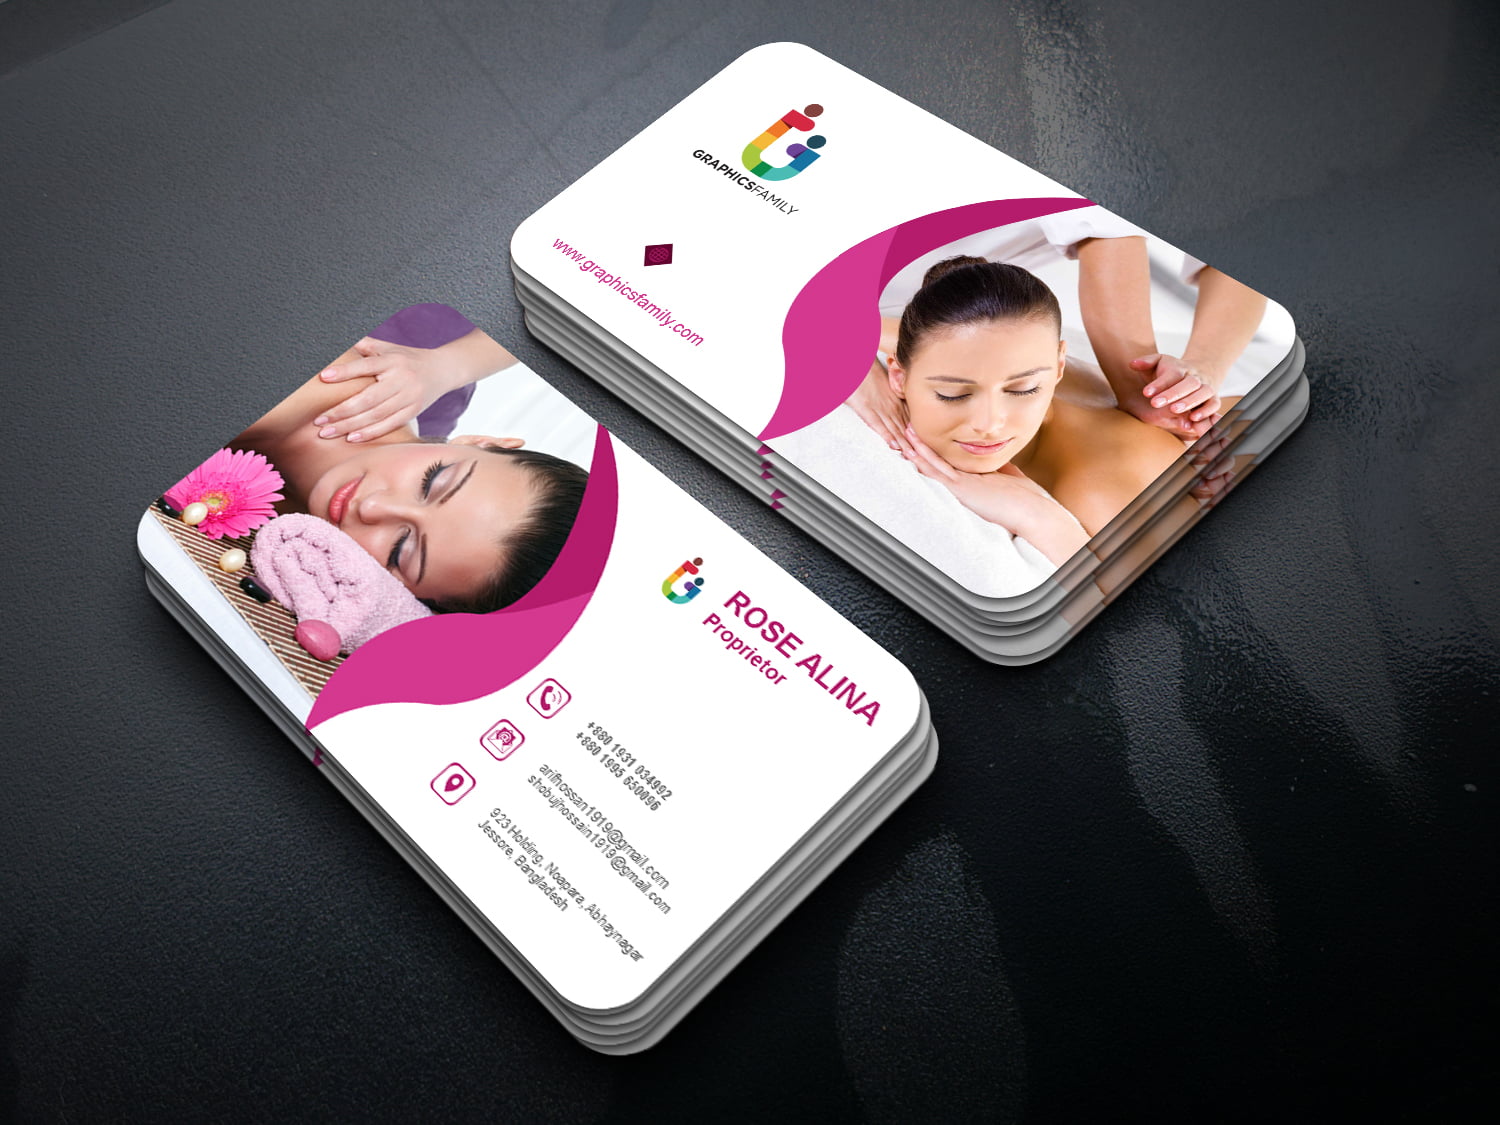 Beauty and Spa Business Card Design GraphicsFamily